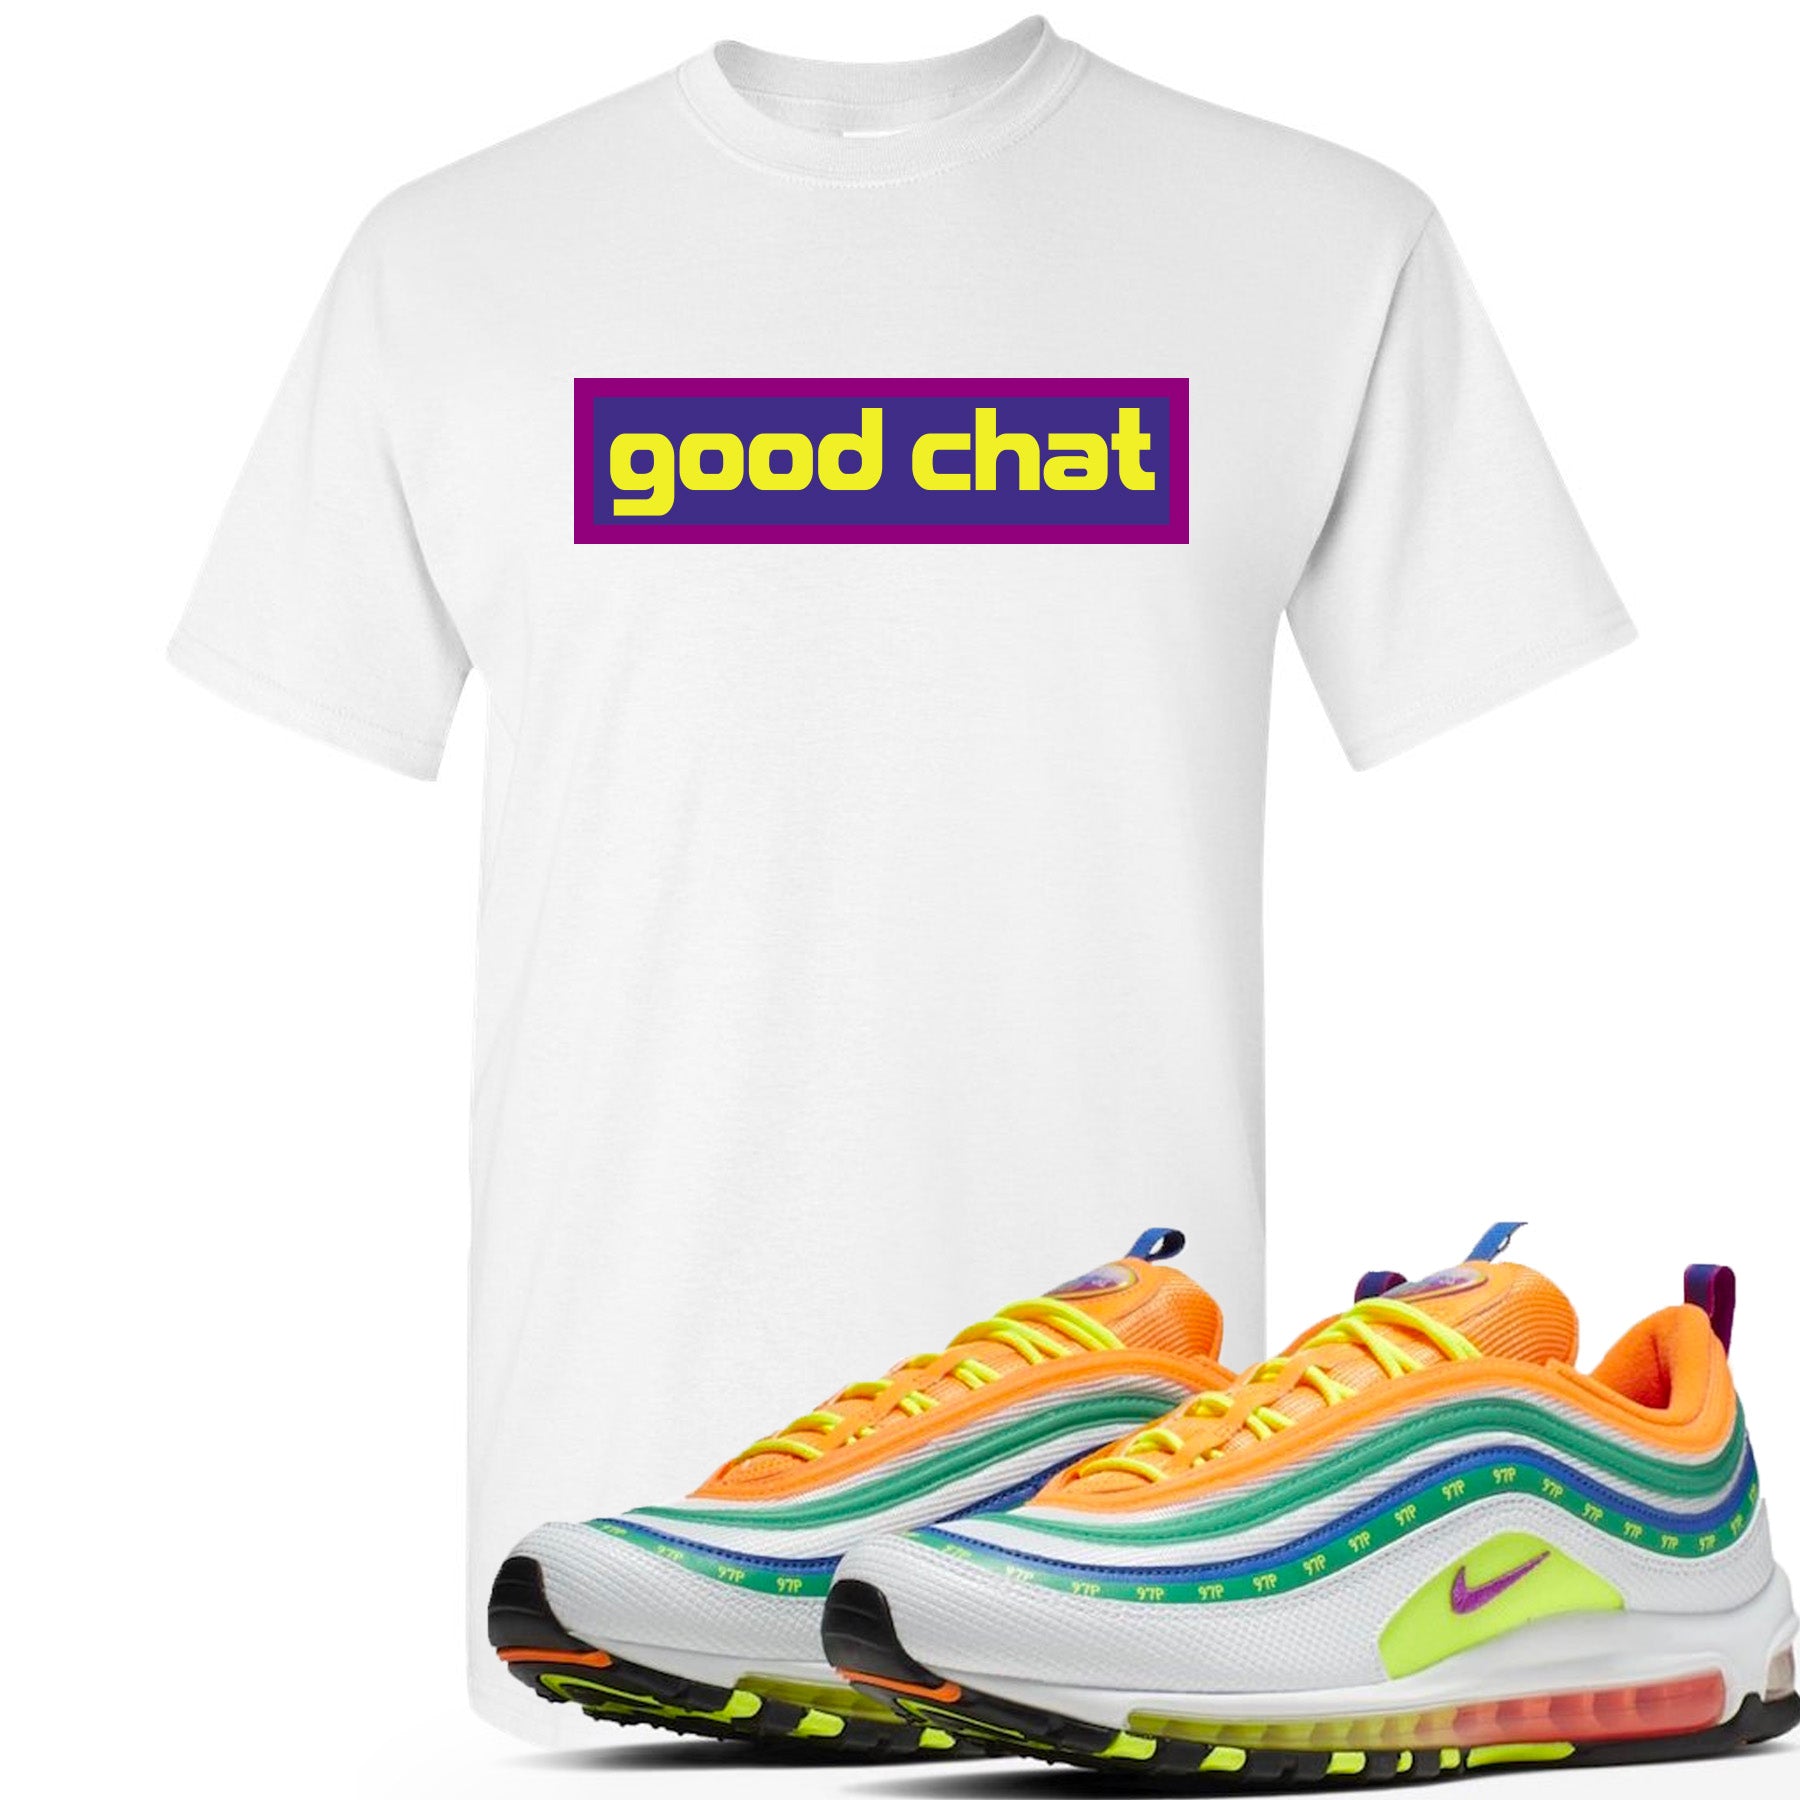 Air Max 97 Summer Of Love Sneaker Hook Up Good Chat White T Shirt Cap Swag